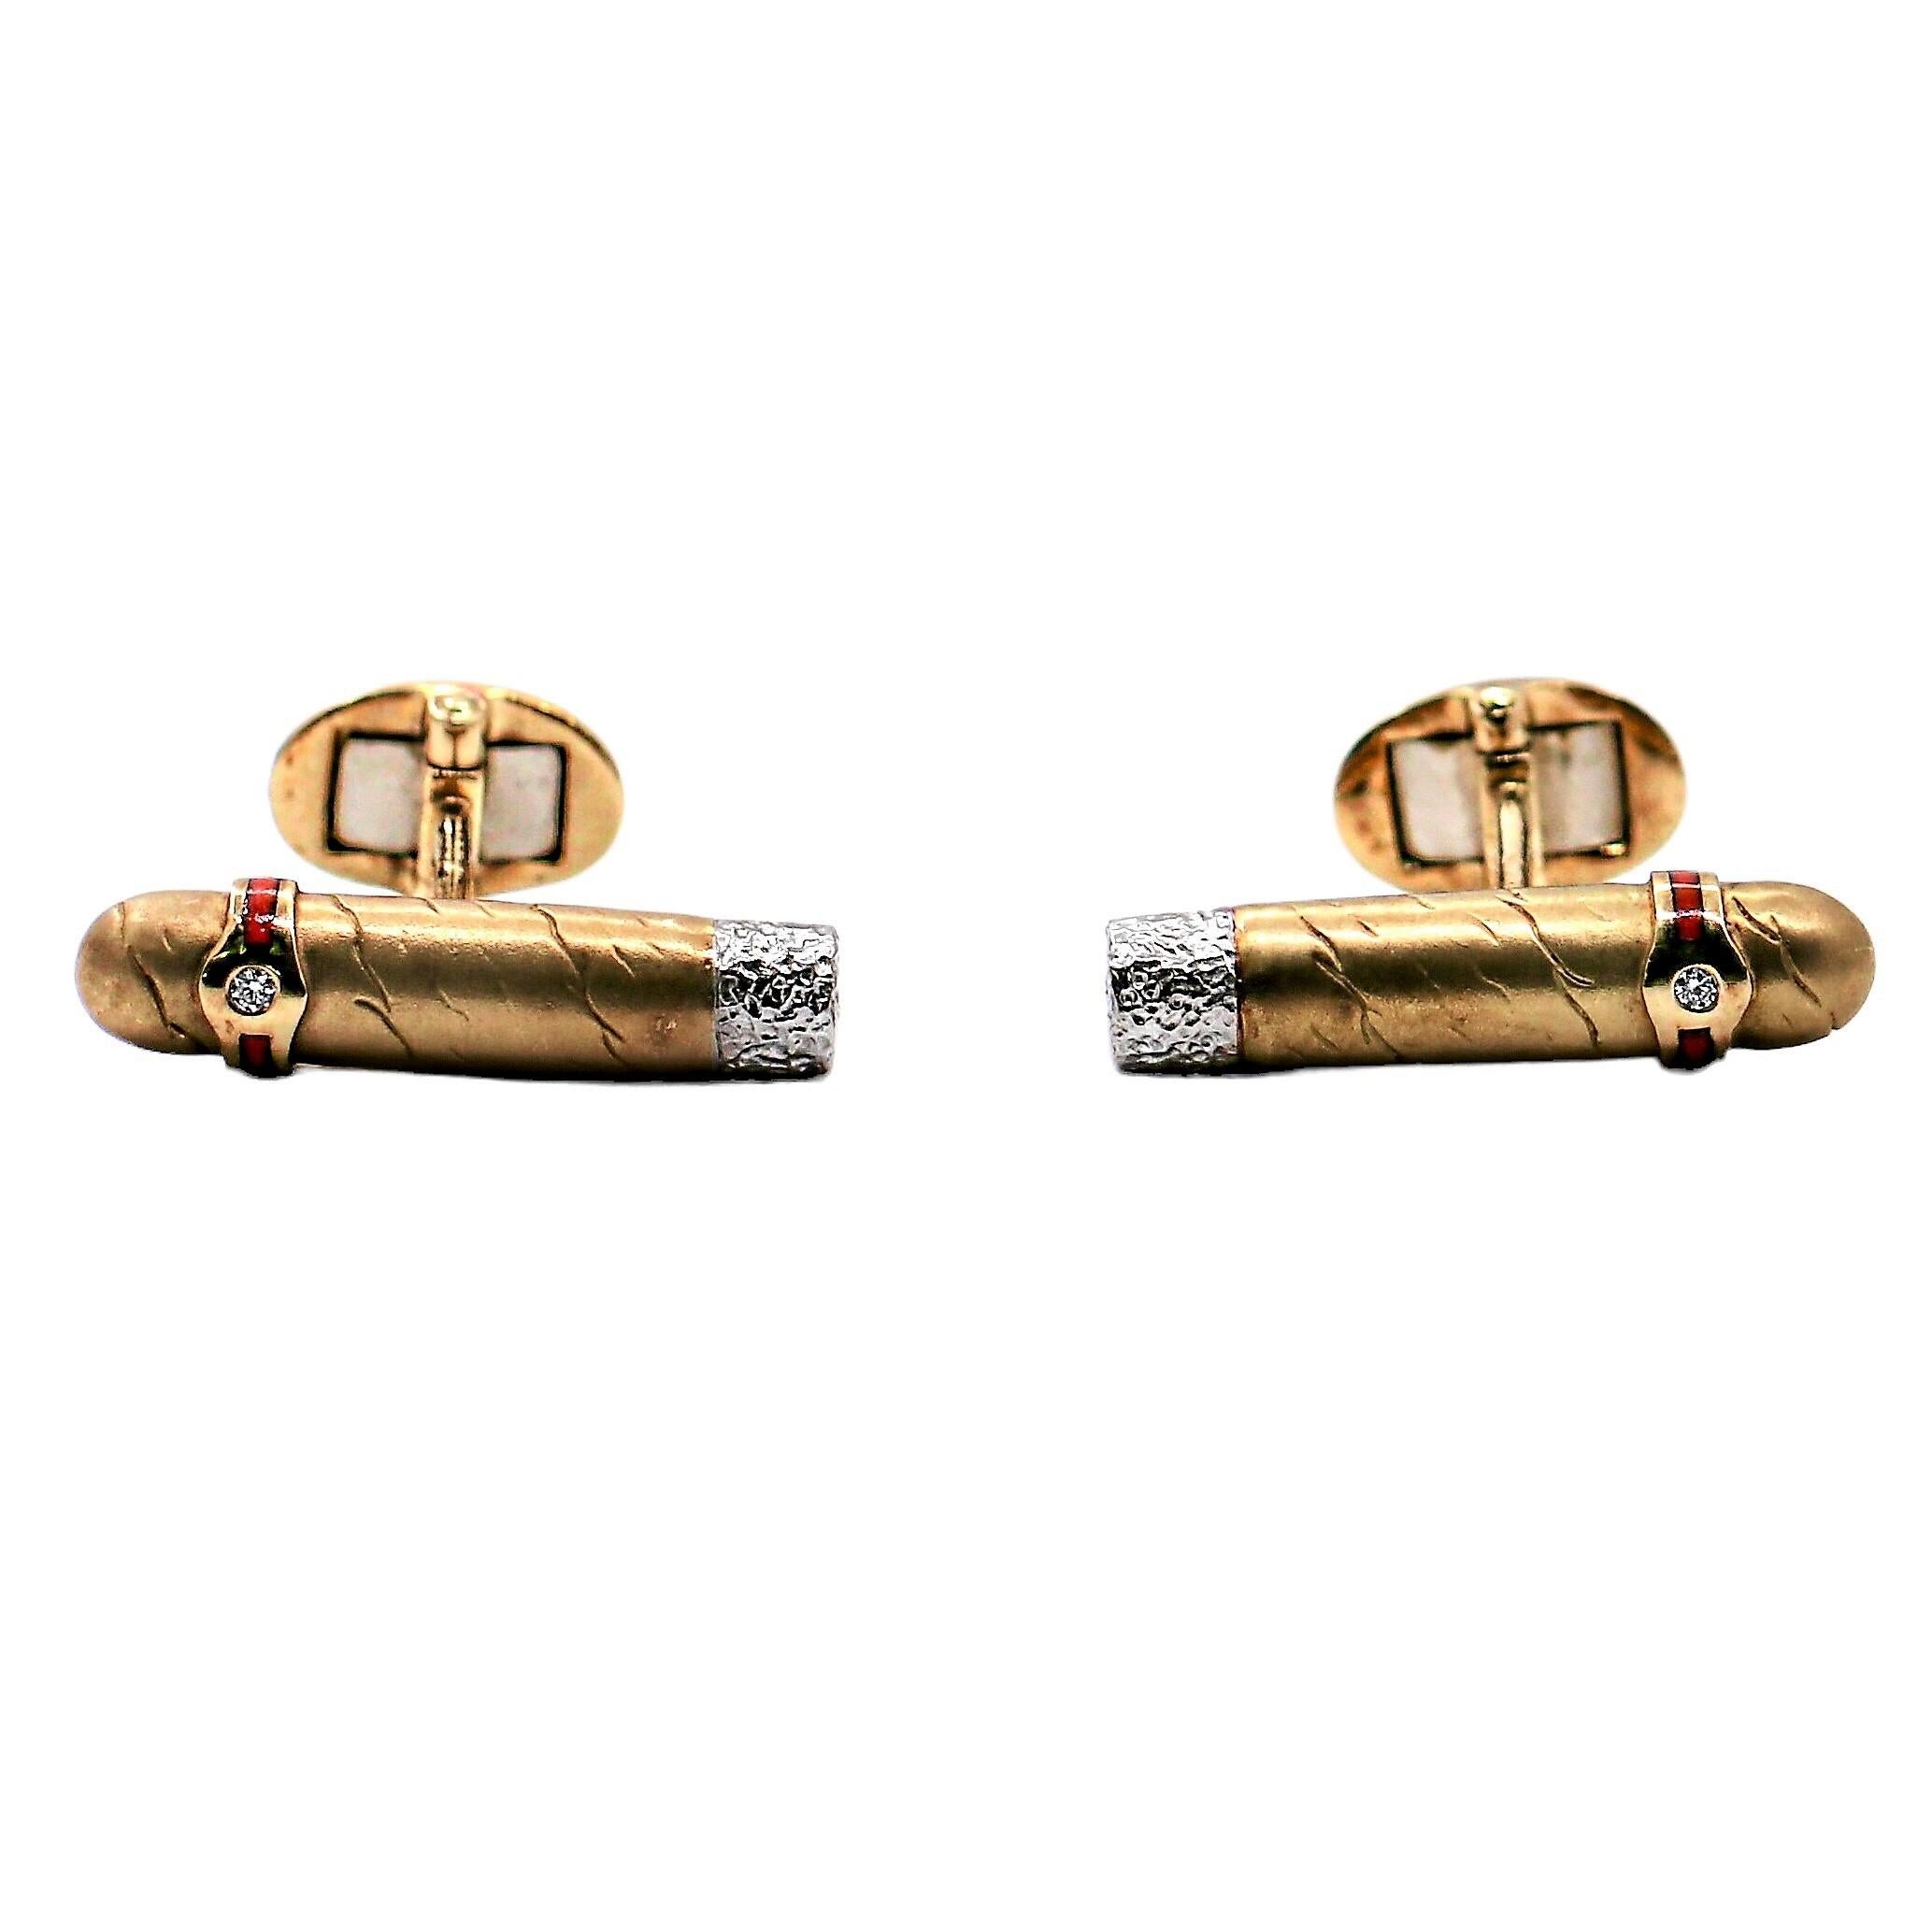 Brilliant Cut 18K Yellow Gold Cigar Cuff Links with Red Enamel, Platinum & Diamond Band For Sale